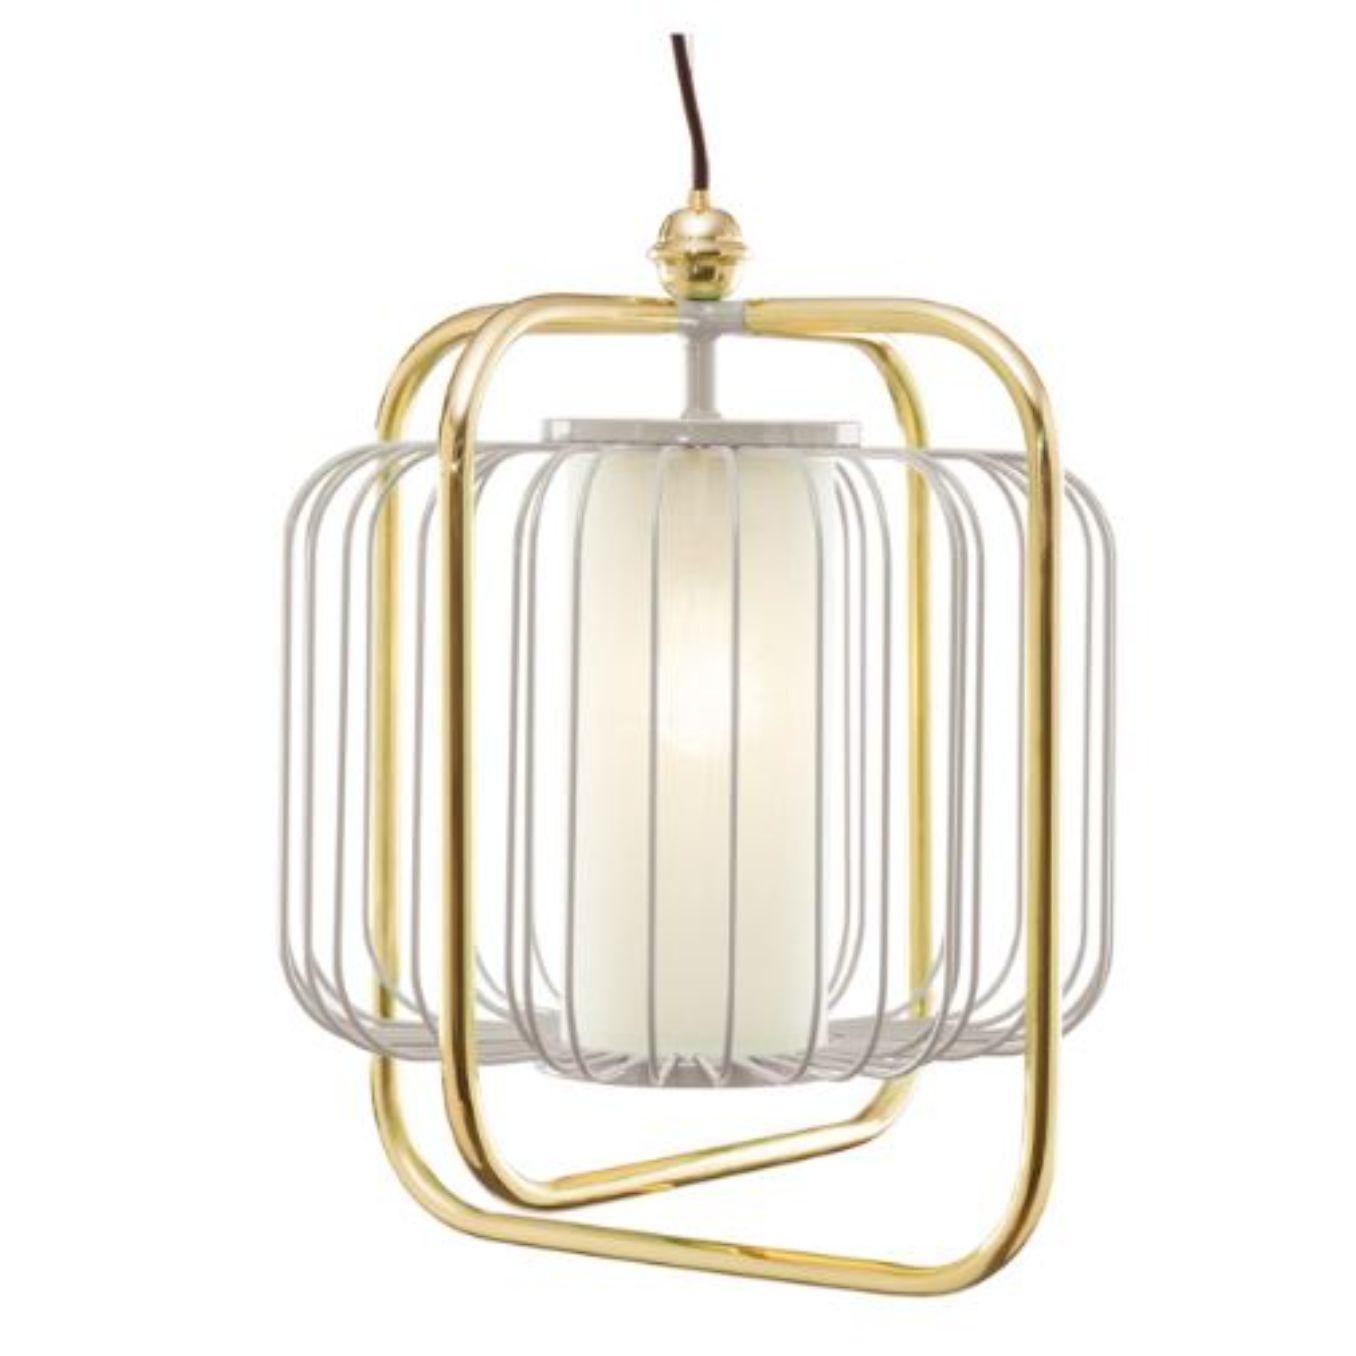 Brass and Dream Jules III Suspension Lamp by Dooq For Sale 1